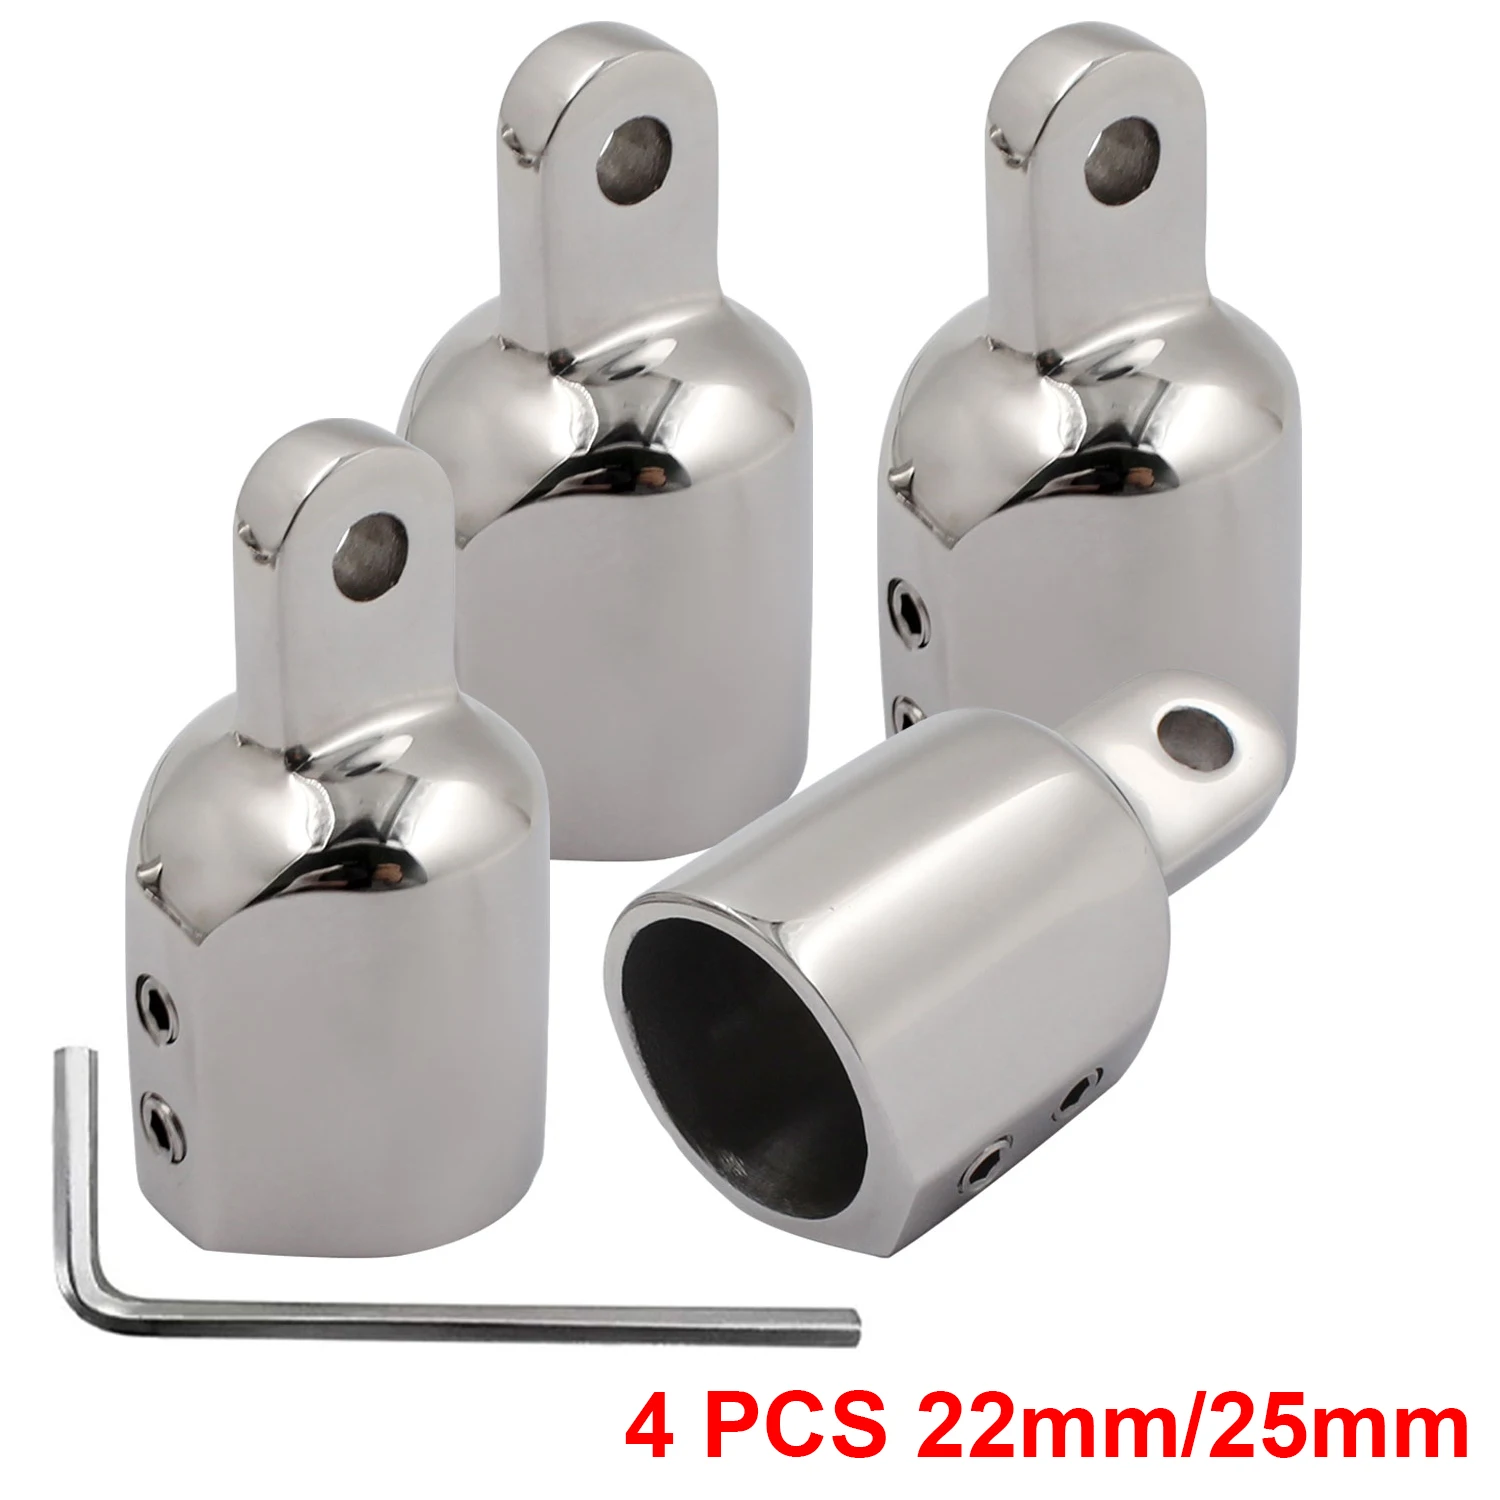 4 Pack 22mm/25mm Heavy Duty Bimini Top Cap Eye End Fitting Stainless Steel 316 Marine Hardware Boat External Eye End 2 pcs 22mm 25mm 90 degree stainless steel 316 boat handrail fitting stanchion handle railing marine hardware